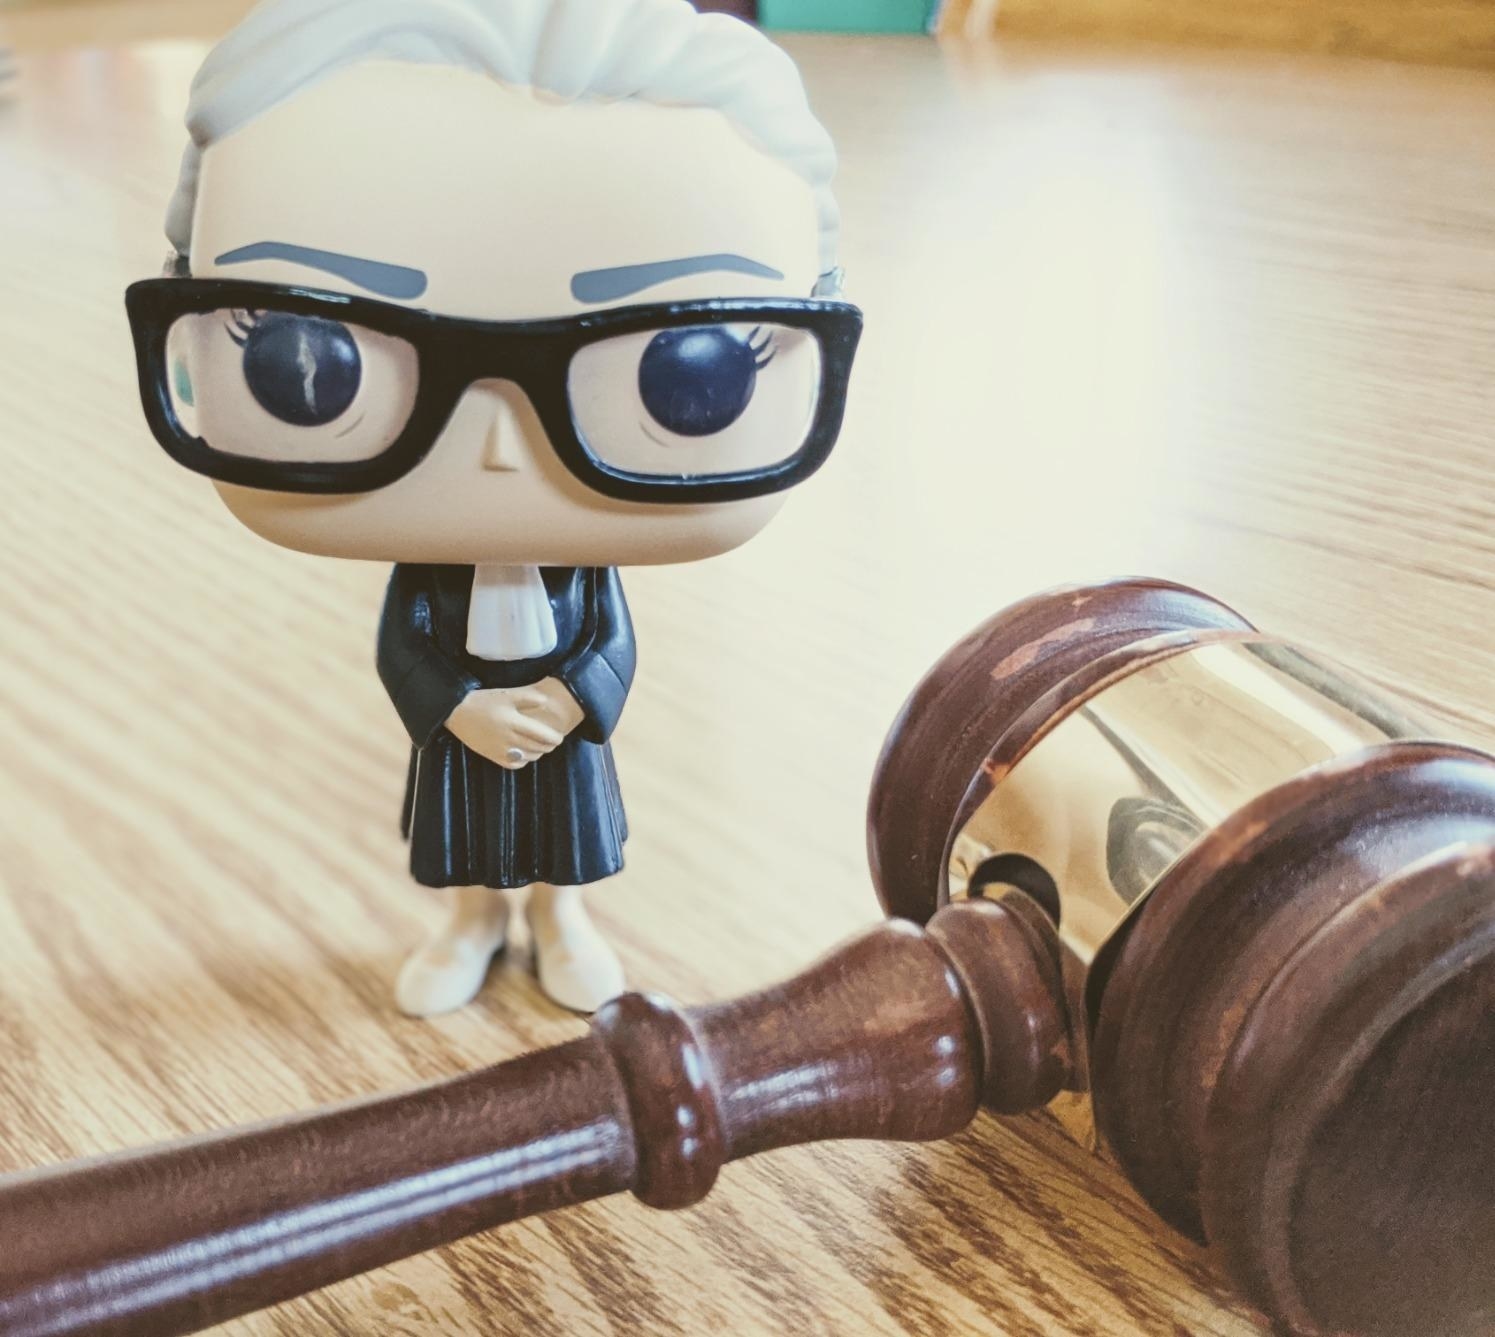 the funko pop figure next to a gavel